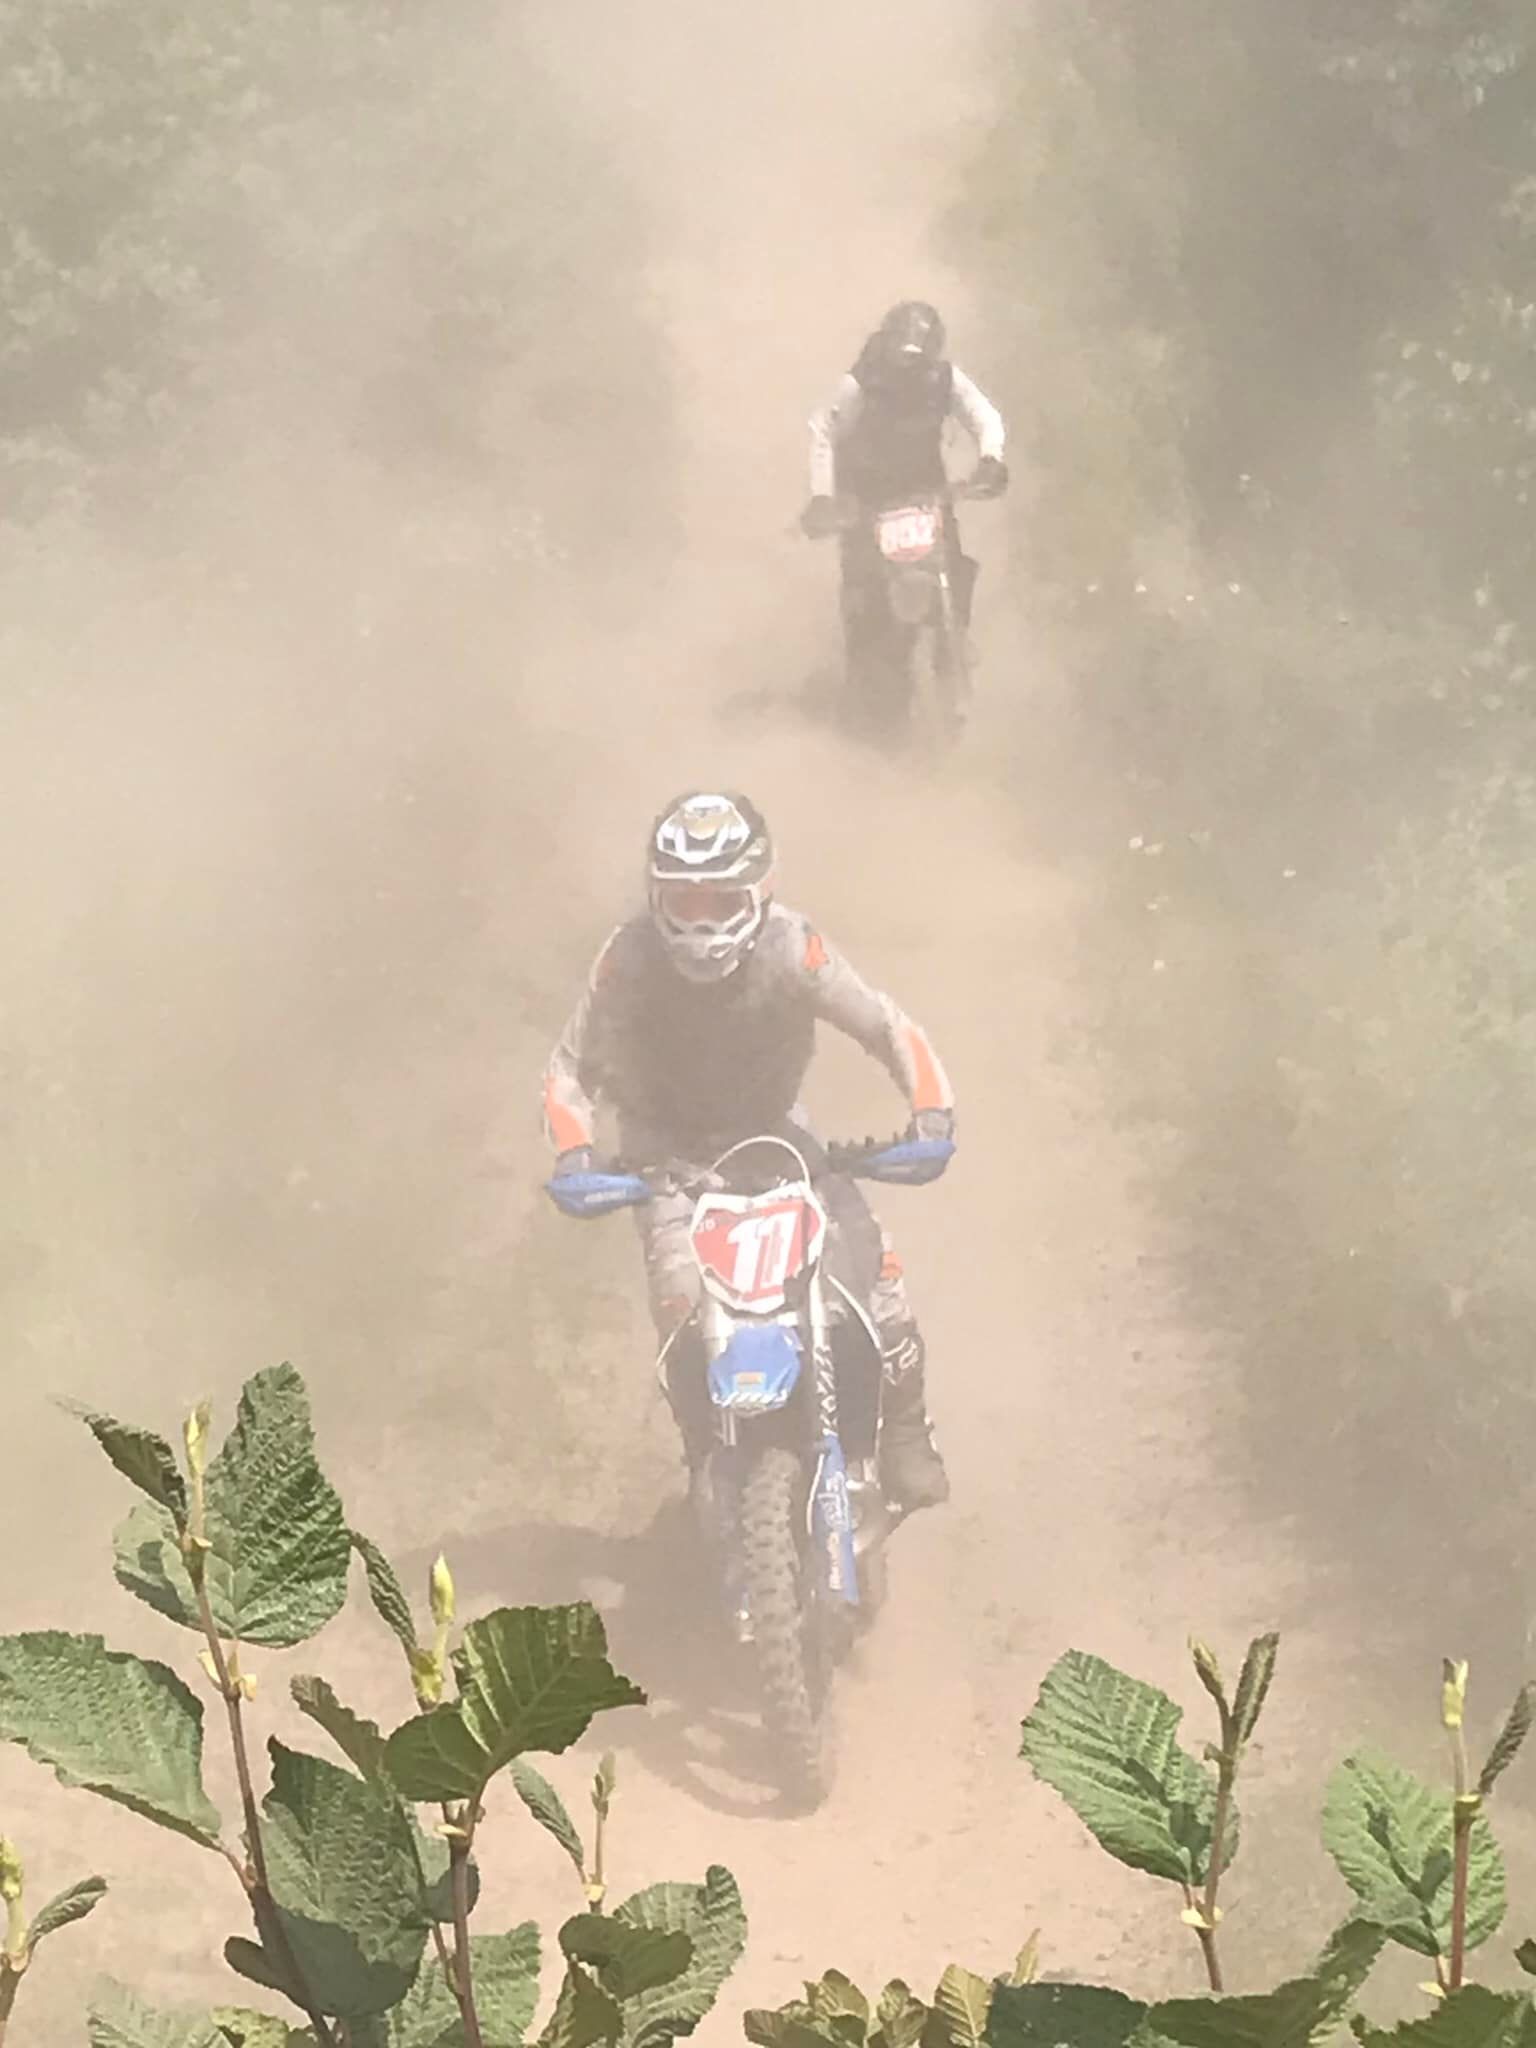 Two racers coming down a Craigmore hill with dust flying